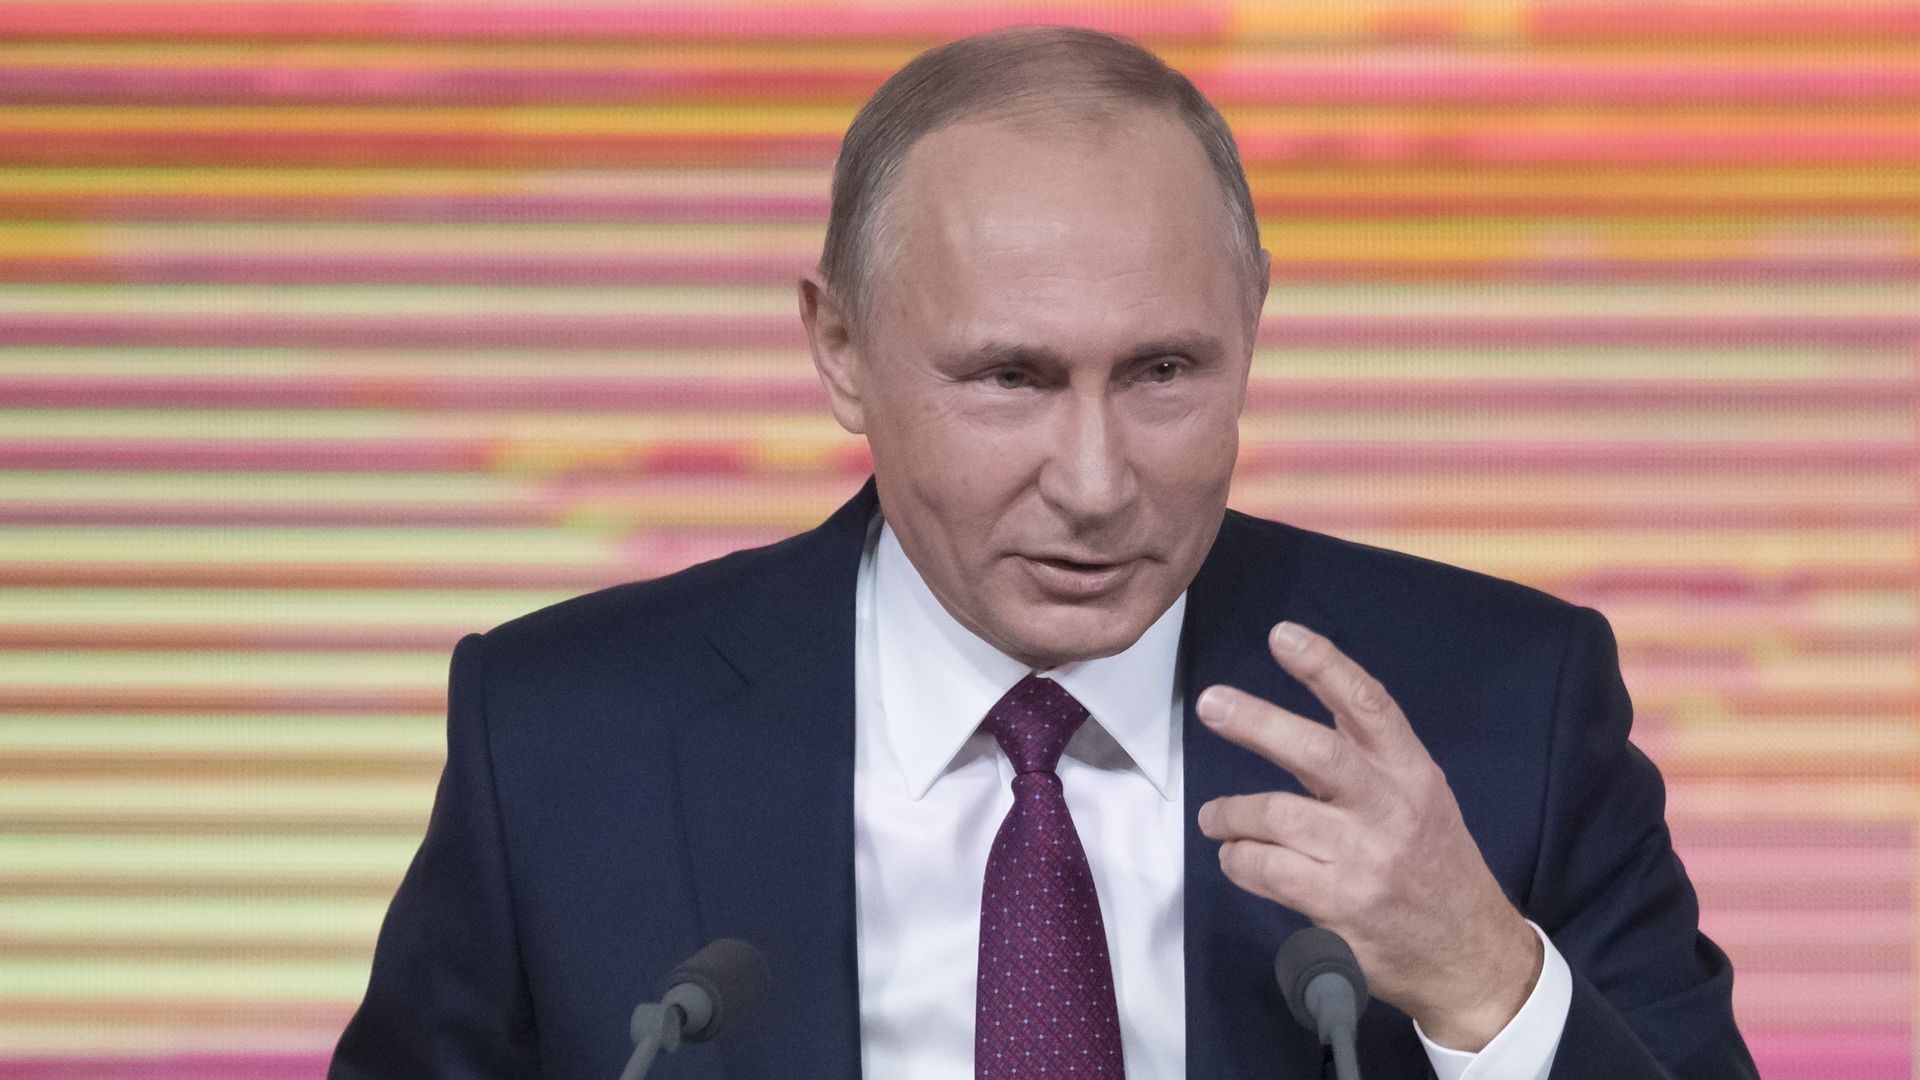 Russian President Vladimir Putin gestures during his annual news conference in Moscow, Russia.